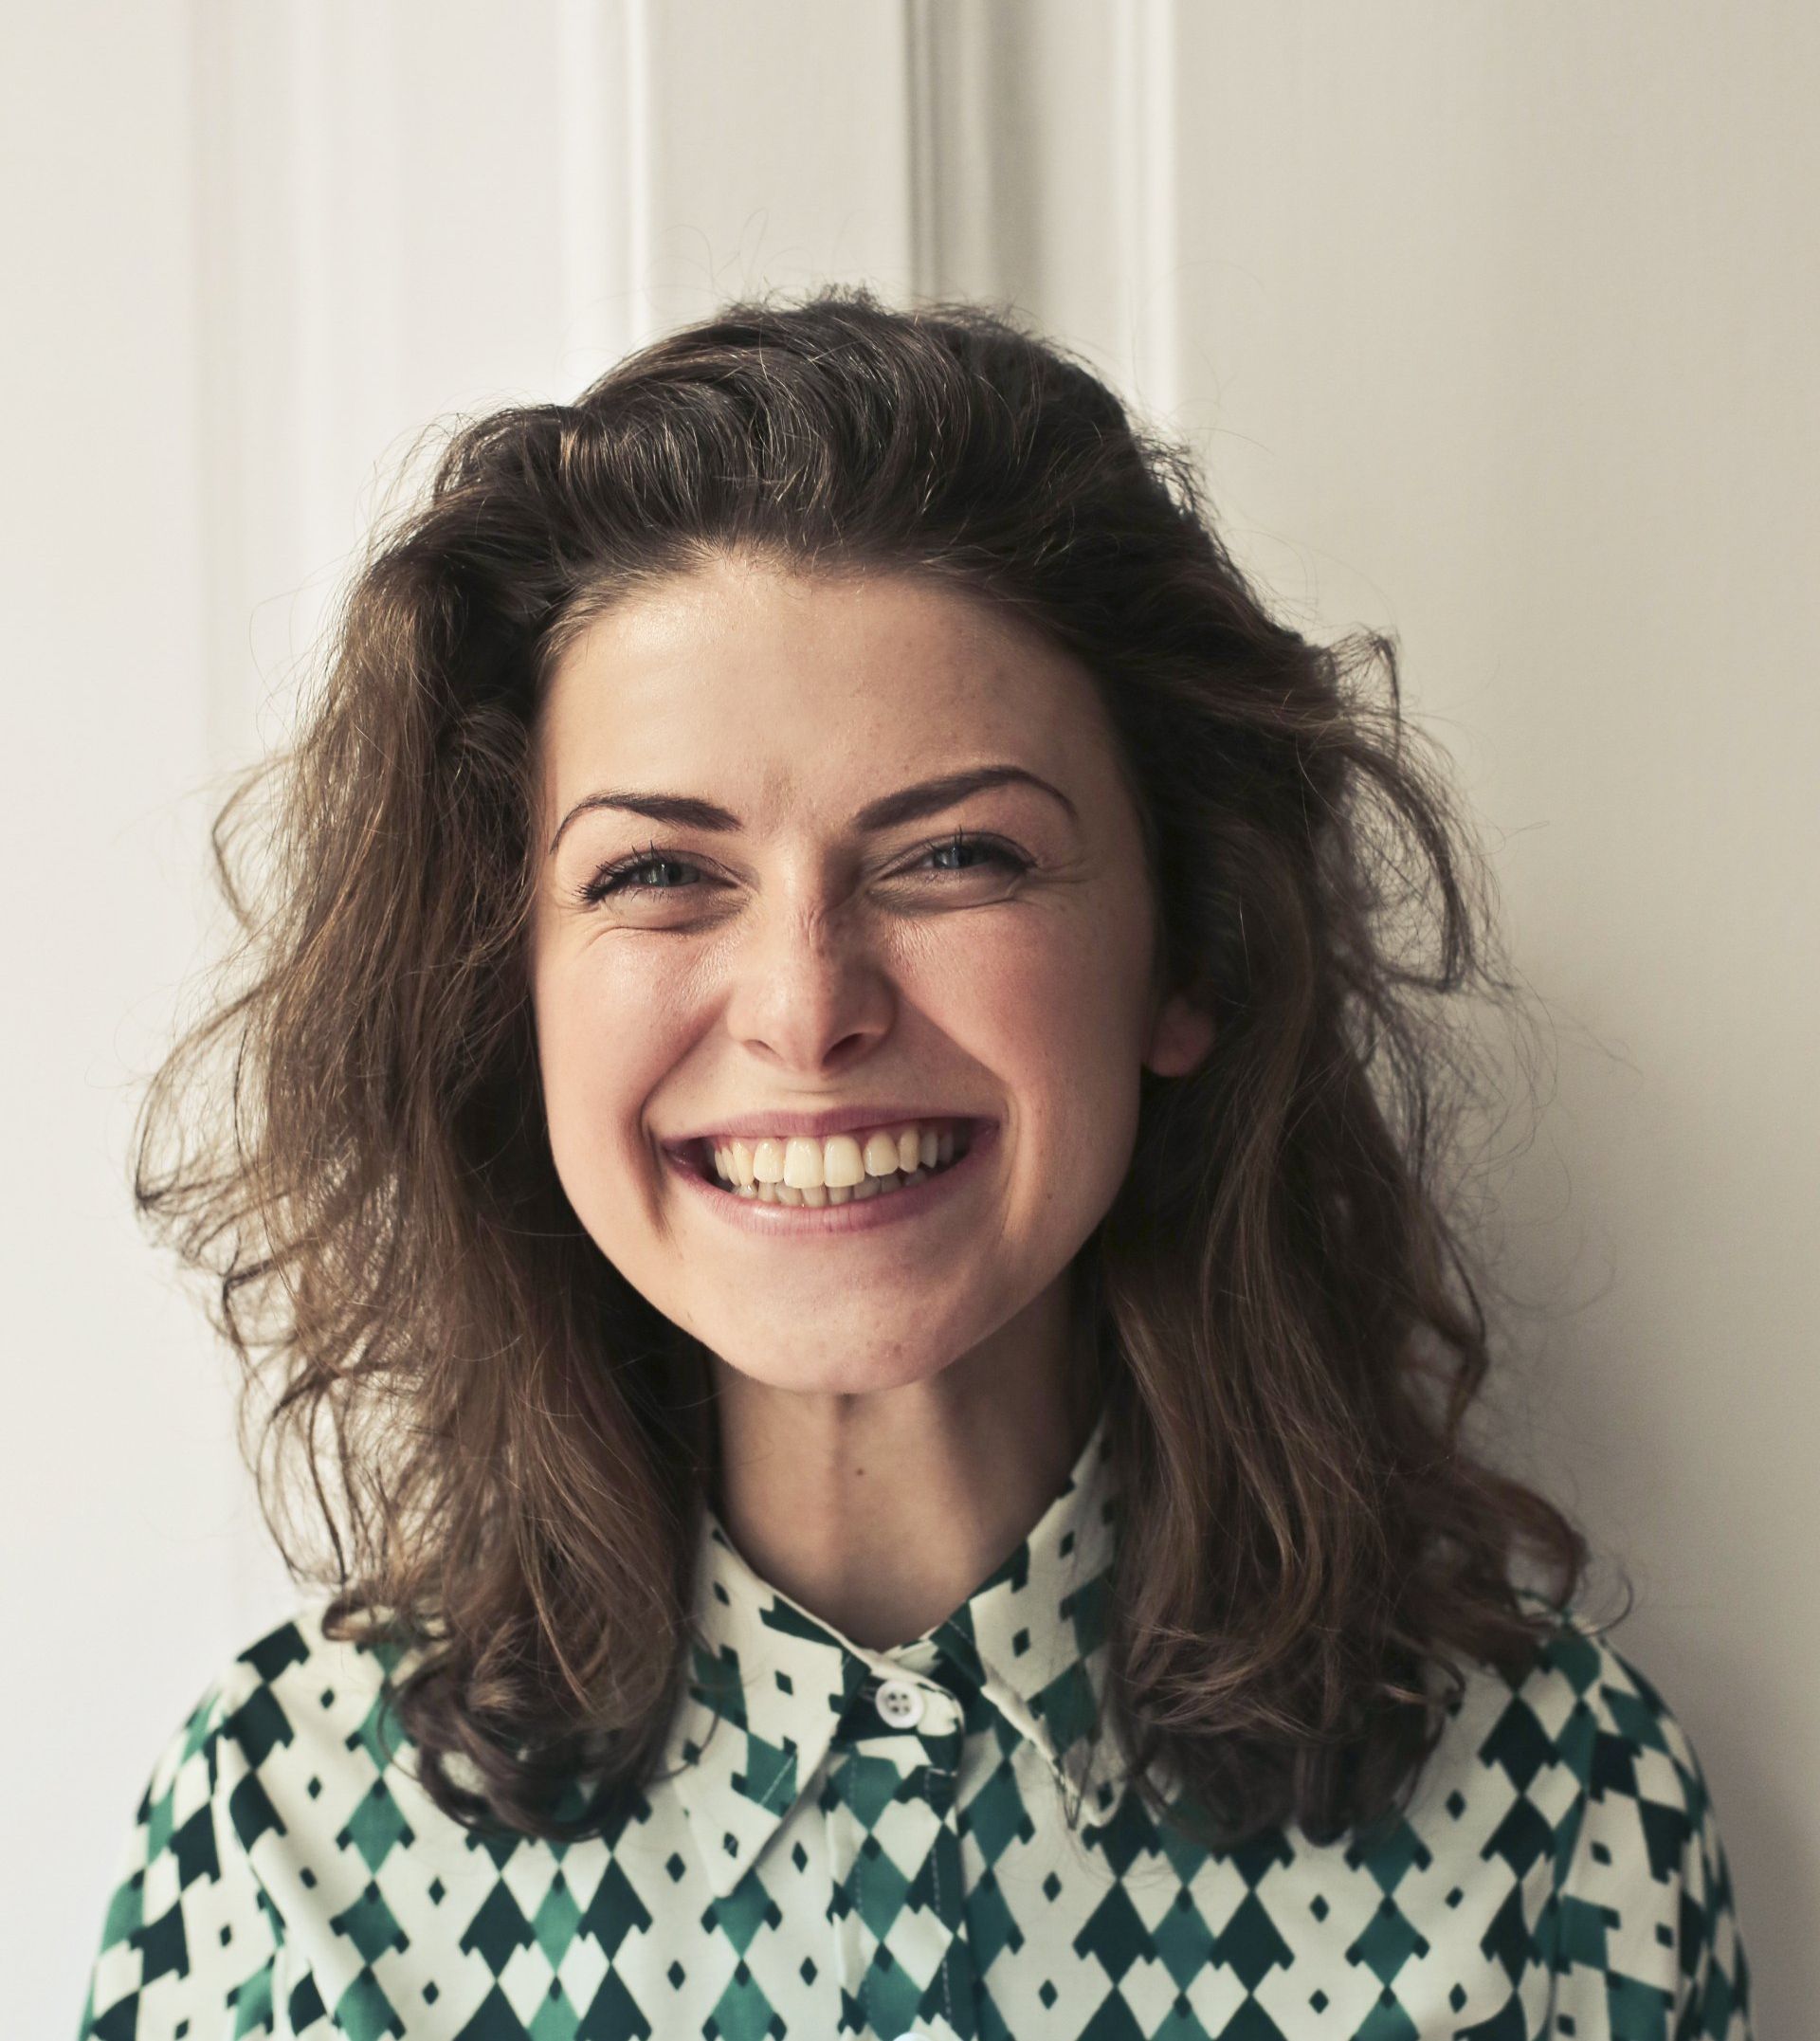 a woman wearing a green and white shirt is smiling